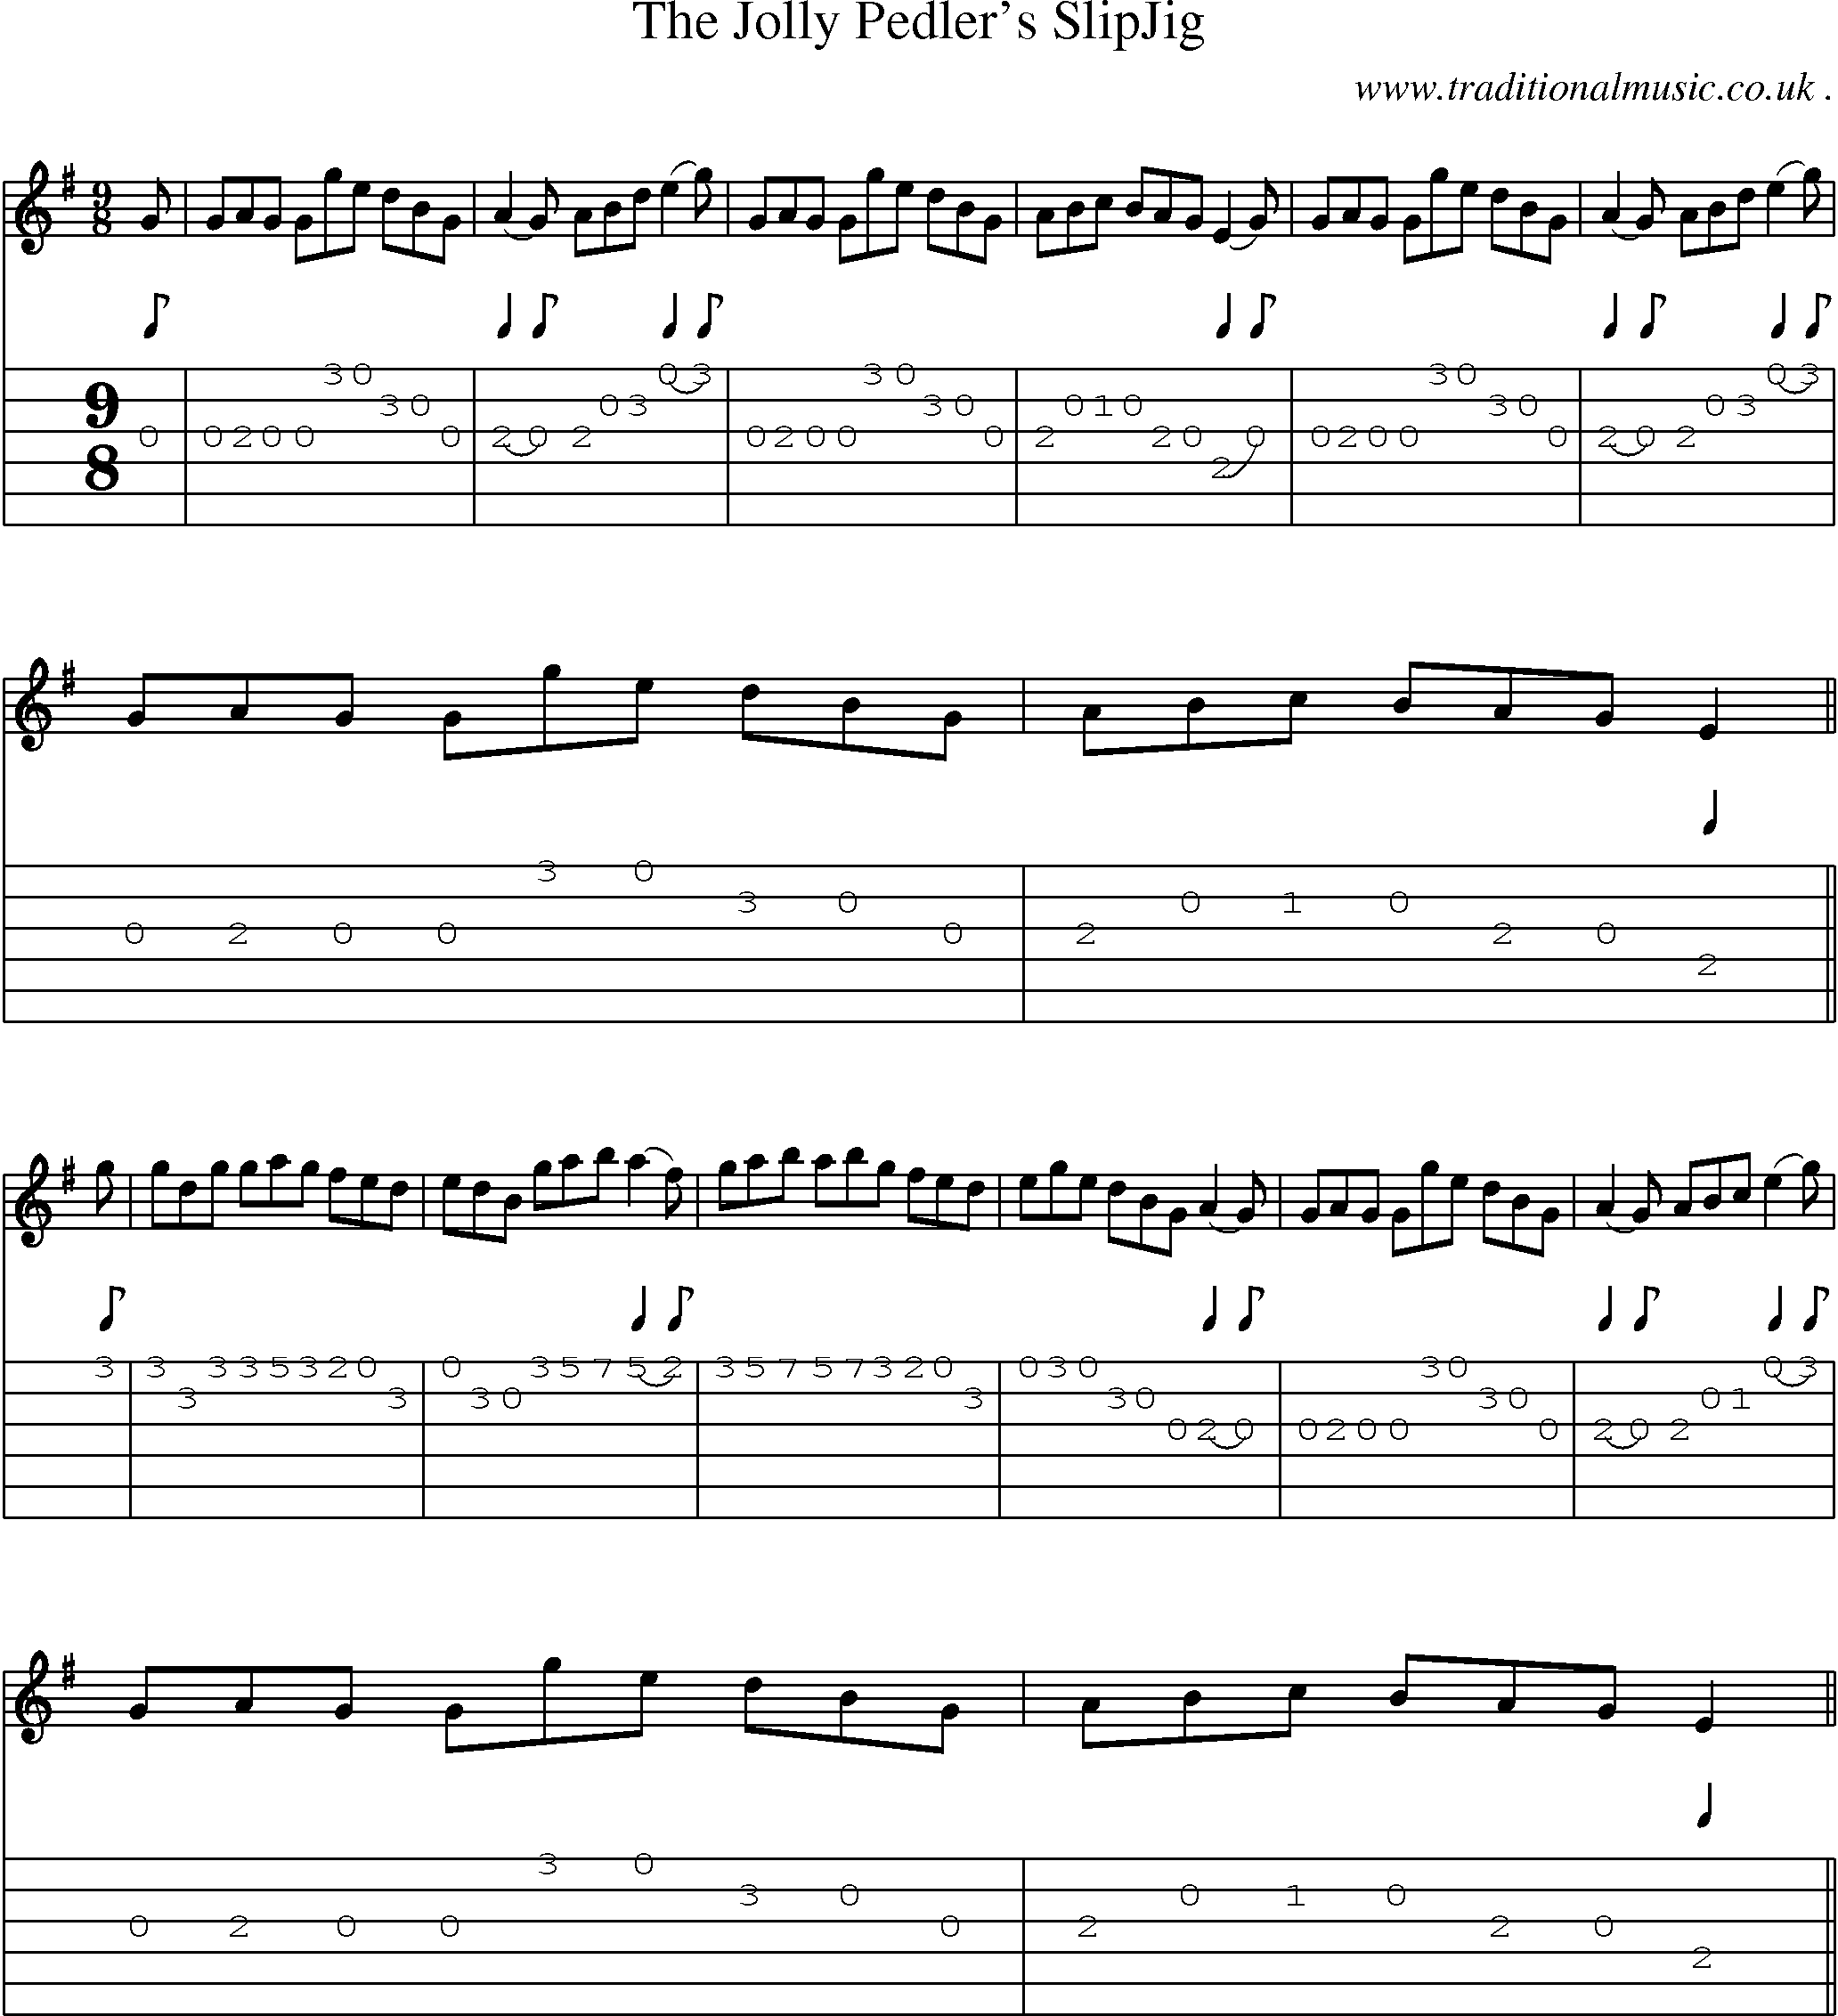 Sheet-Music and Guitar Tabs for The Jolly Pedlers Slipjig